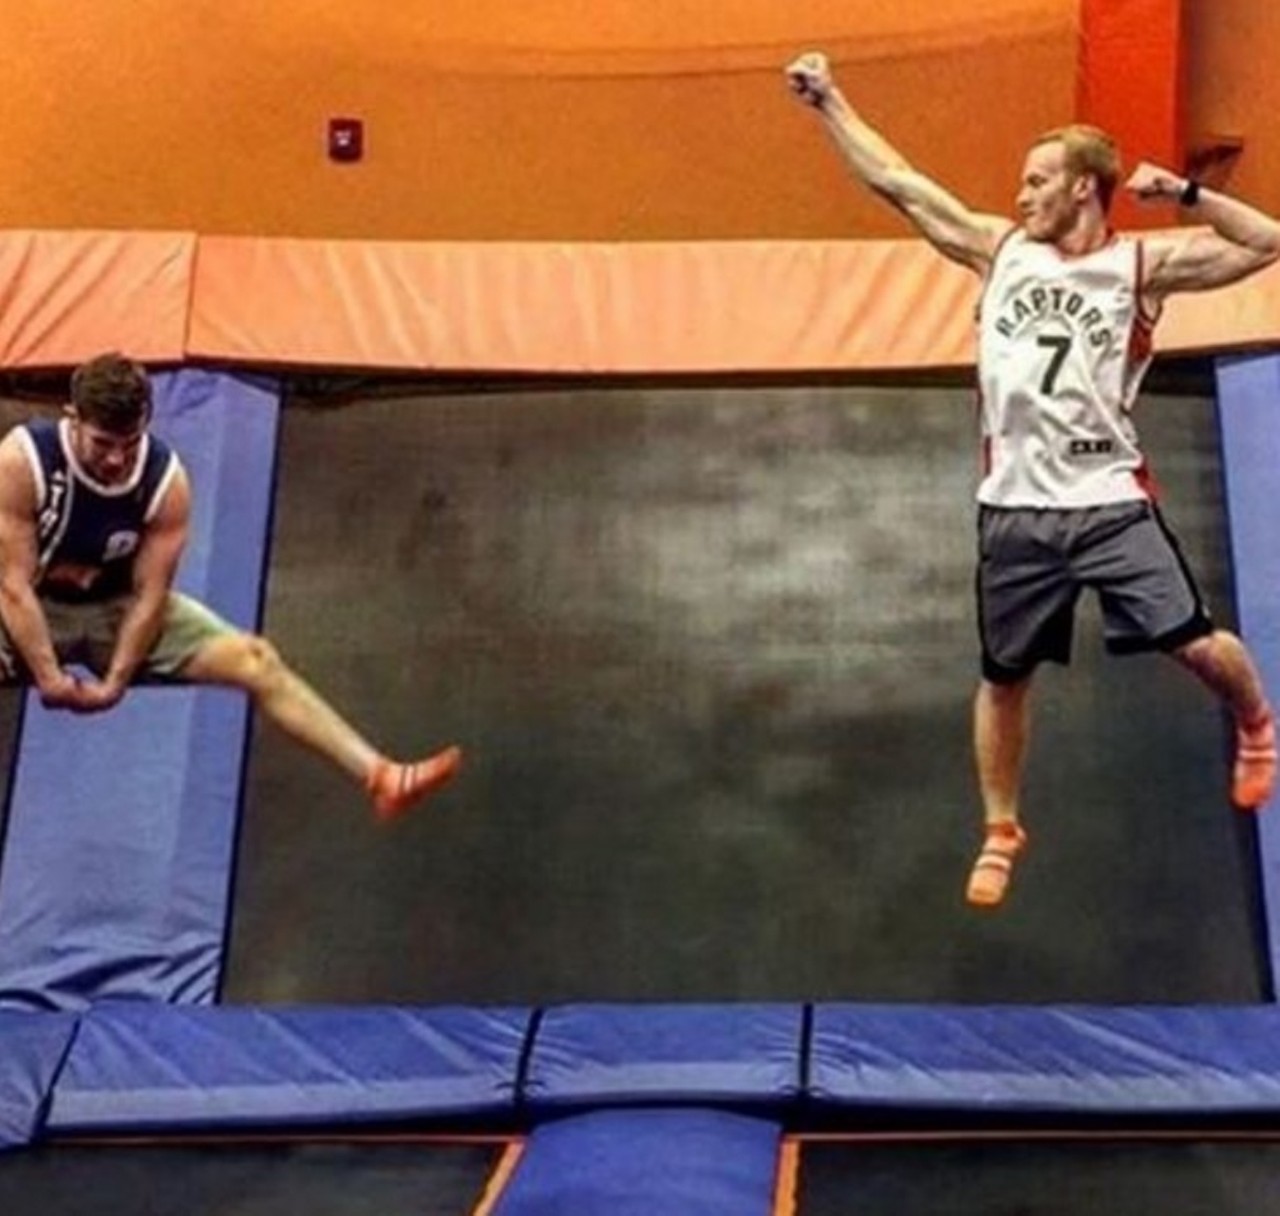 SkyFit Workouts
Want to feel like a kid again? SkyZone trampoline park (17379 Edison Ave., 636-530-4550) offers SkyFit workout classes, where participants perform core exercises, aerobics and calisthenics on the trampolines. Did we mention you can burn up to 1,000 calories an hour? Photo courtesy of Instagram / skyzone.